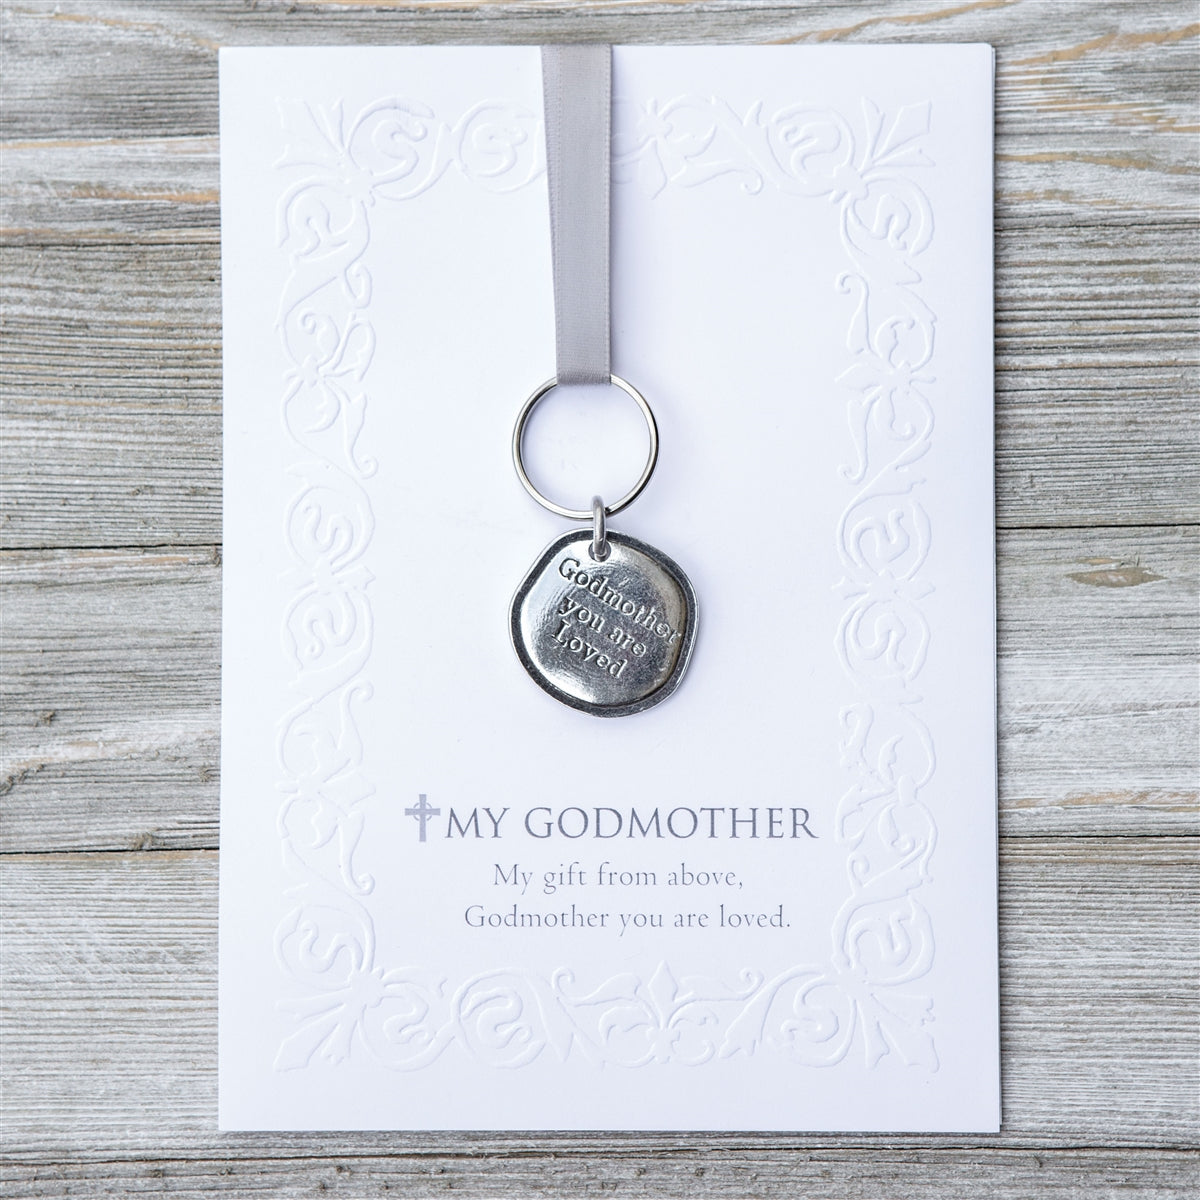 Keychain with pewter coin that says &quot;Godmother you are loved&quot; packaged with an embossed notecard with My Godmother sentiment.